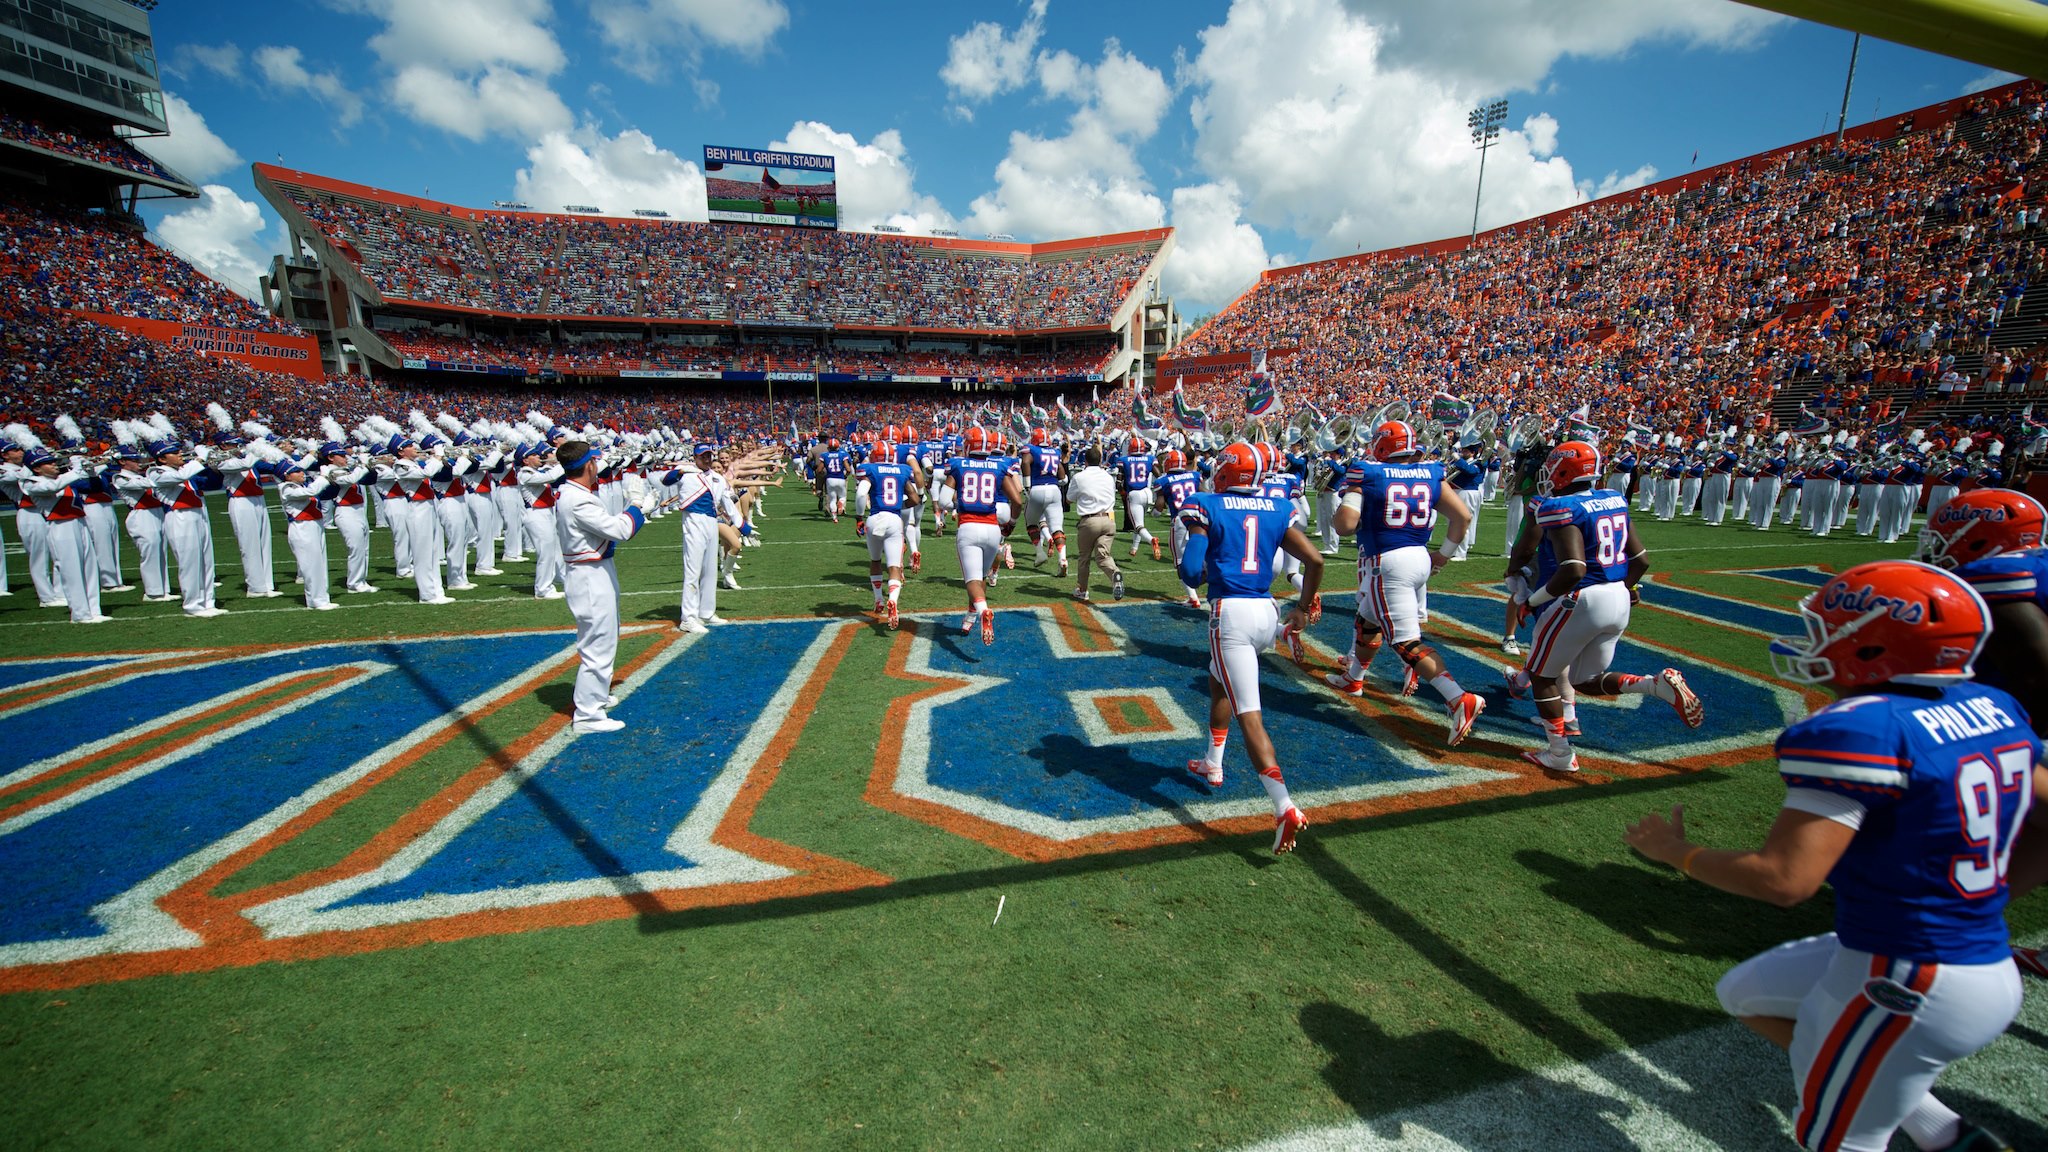 Gators 4K wallpapers for your desktop or mobile screen free and easy to  download